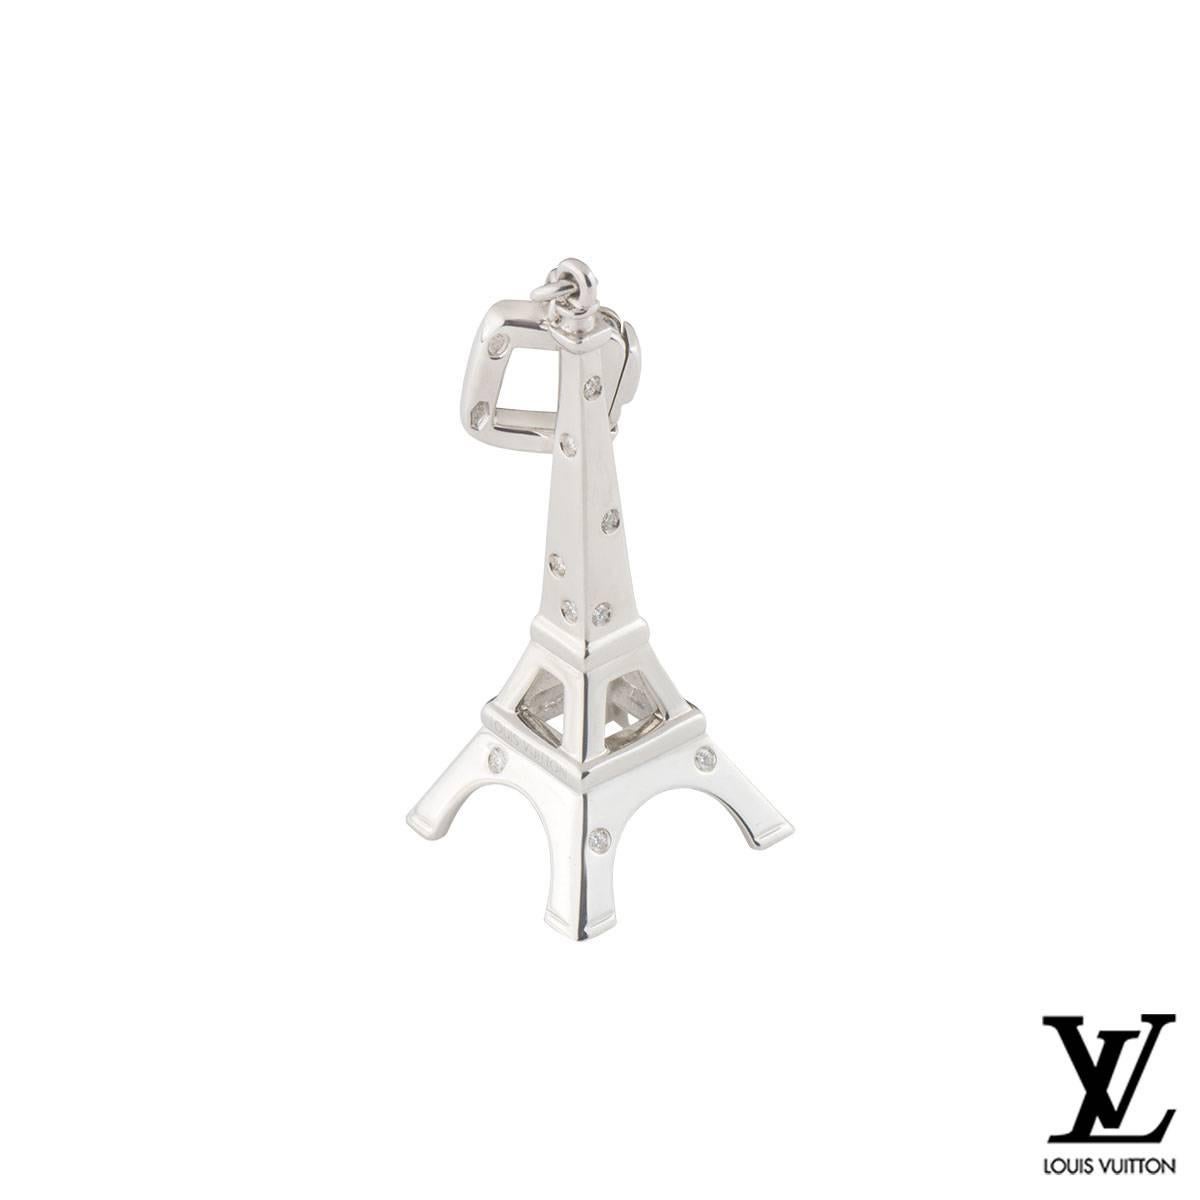 An iconic 18k white gold Louis Vuitton charm. The charm comprises of the Eiffel Tower with 19 round brilliant cut diamonds placed randomly in a rubover setting. The diamonds have a total weight of approximately 0.25ct, G colour and VS clarity. The